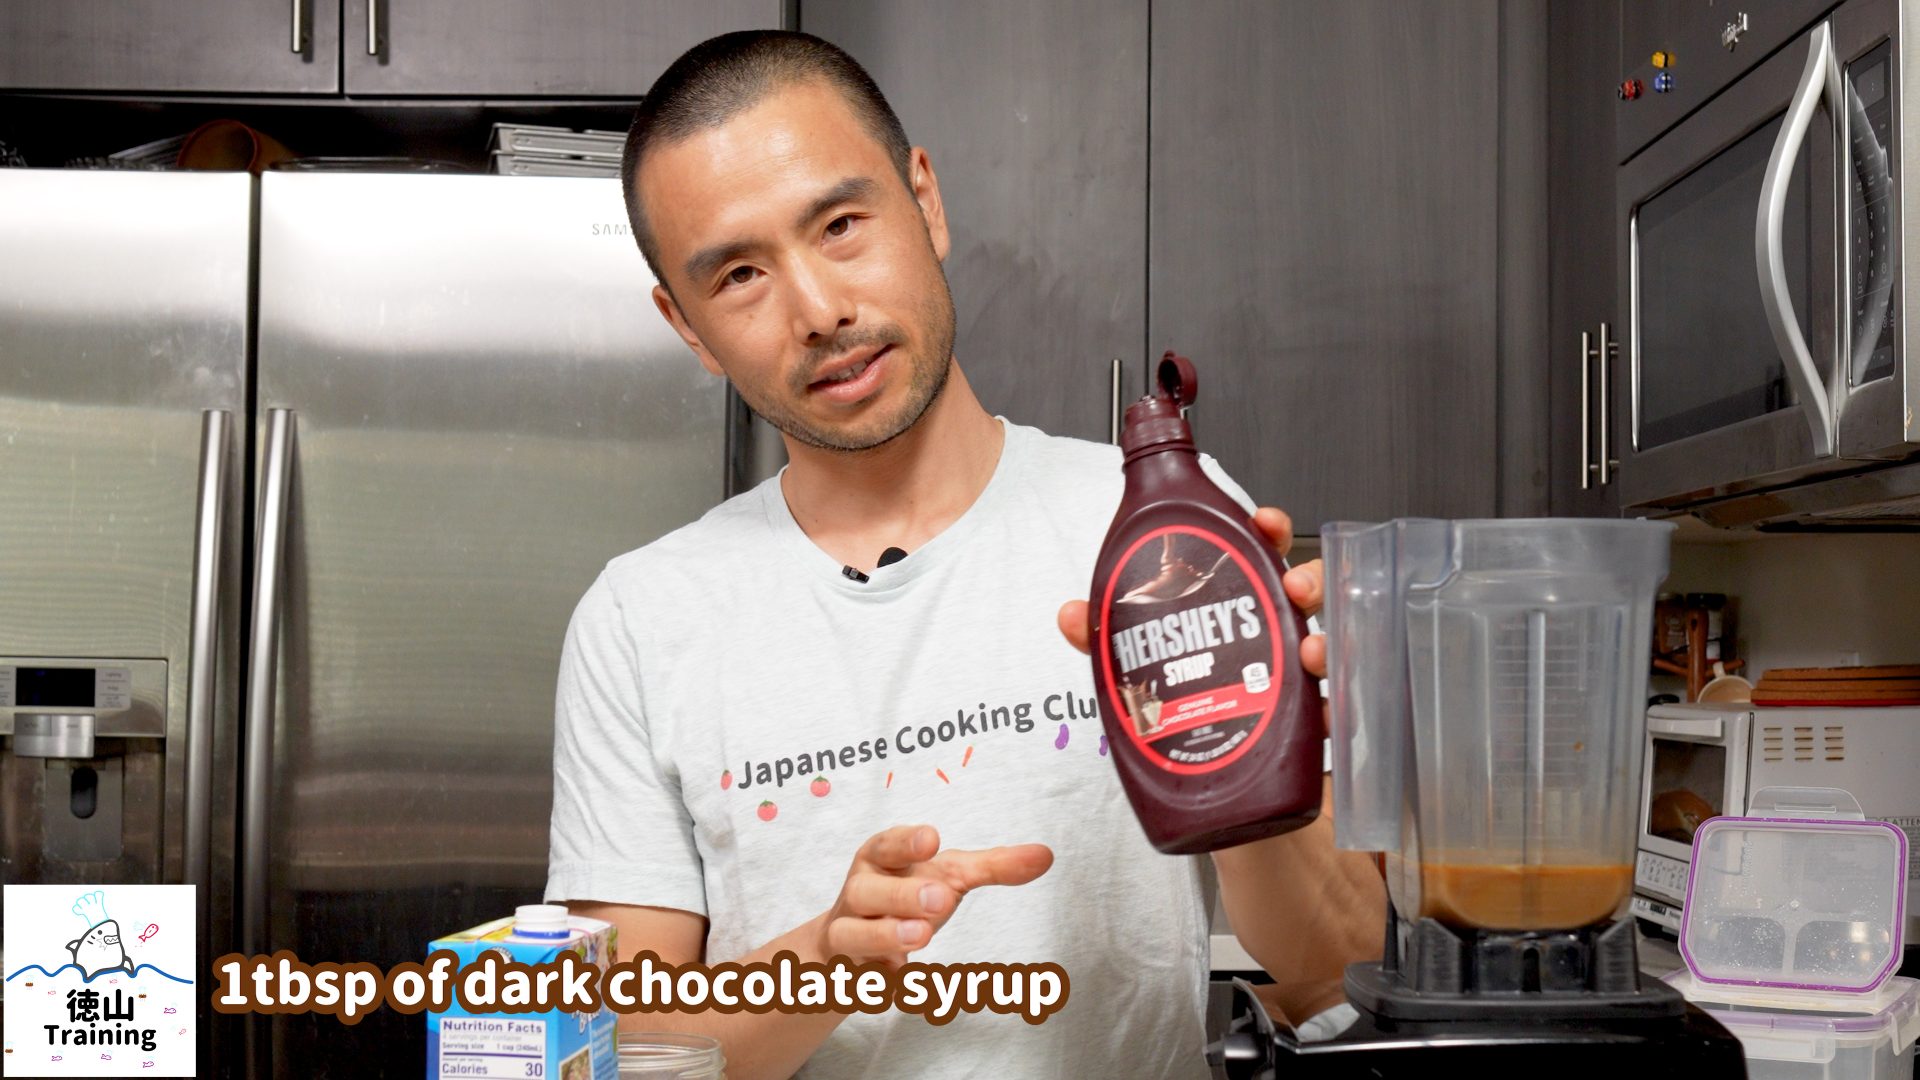 Hershey's Dark Chocolate Syrup as ingredient in ice-blended mocha frappuccino